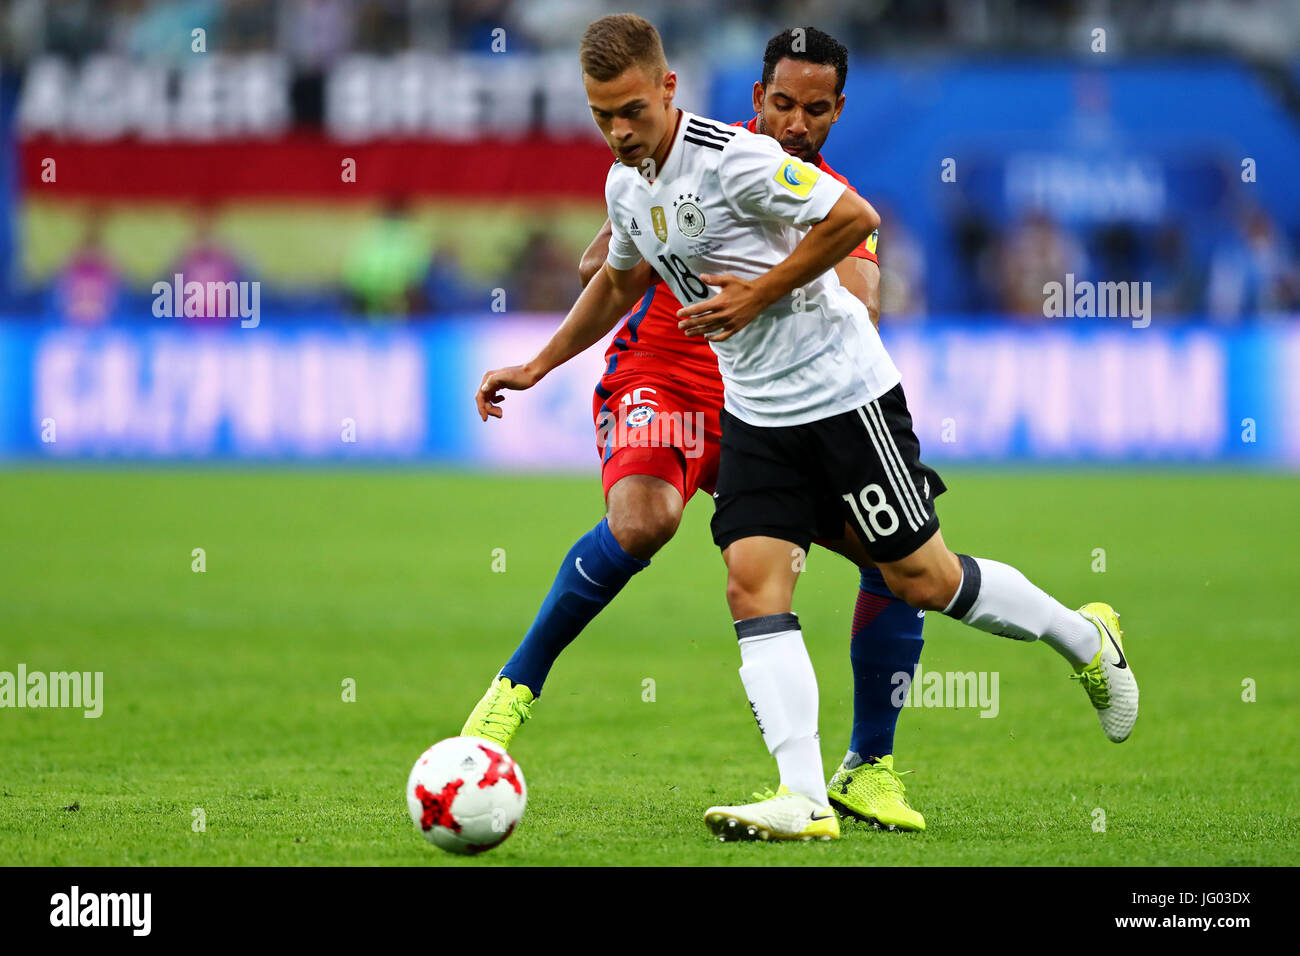 St Petersburg, Russia. 2nd July, 2017. CHILE VS GERMANY - Jean Beausejour of Chile contests with Joshua Kimmich of Germany during a match between Chile and Germany at the 2017 Confederations Cup Final this Sunday at the Krestovsky Stadium (Zenit Arena) in St. Petersburg, Russia. (Photo: Heuler Andrey/DiaEsportivo/Fotoarena/Alamy Live News) Stock Photo